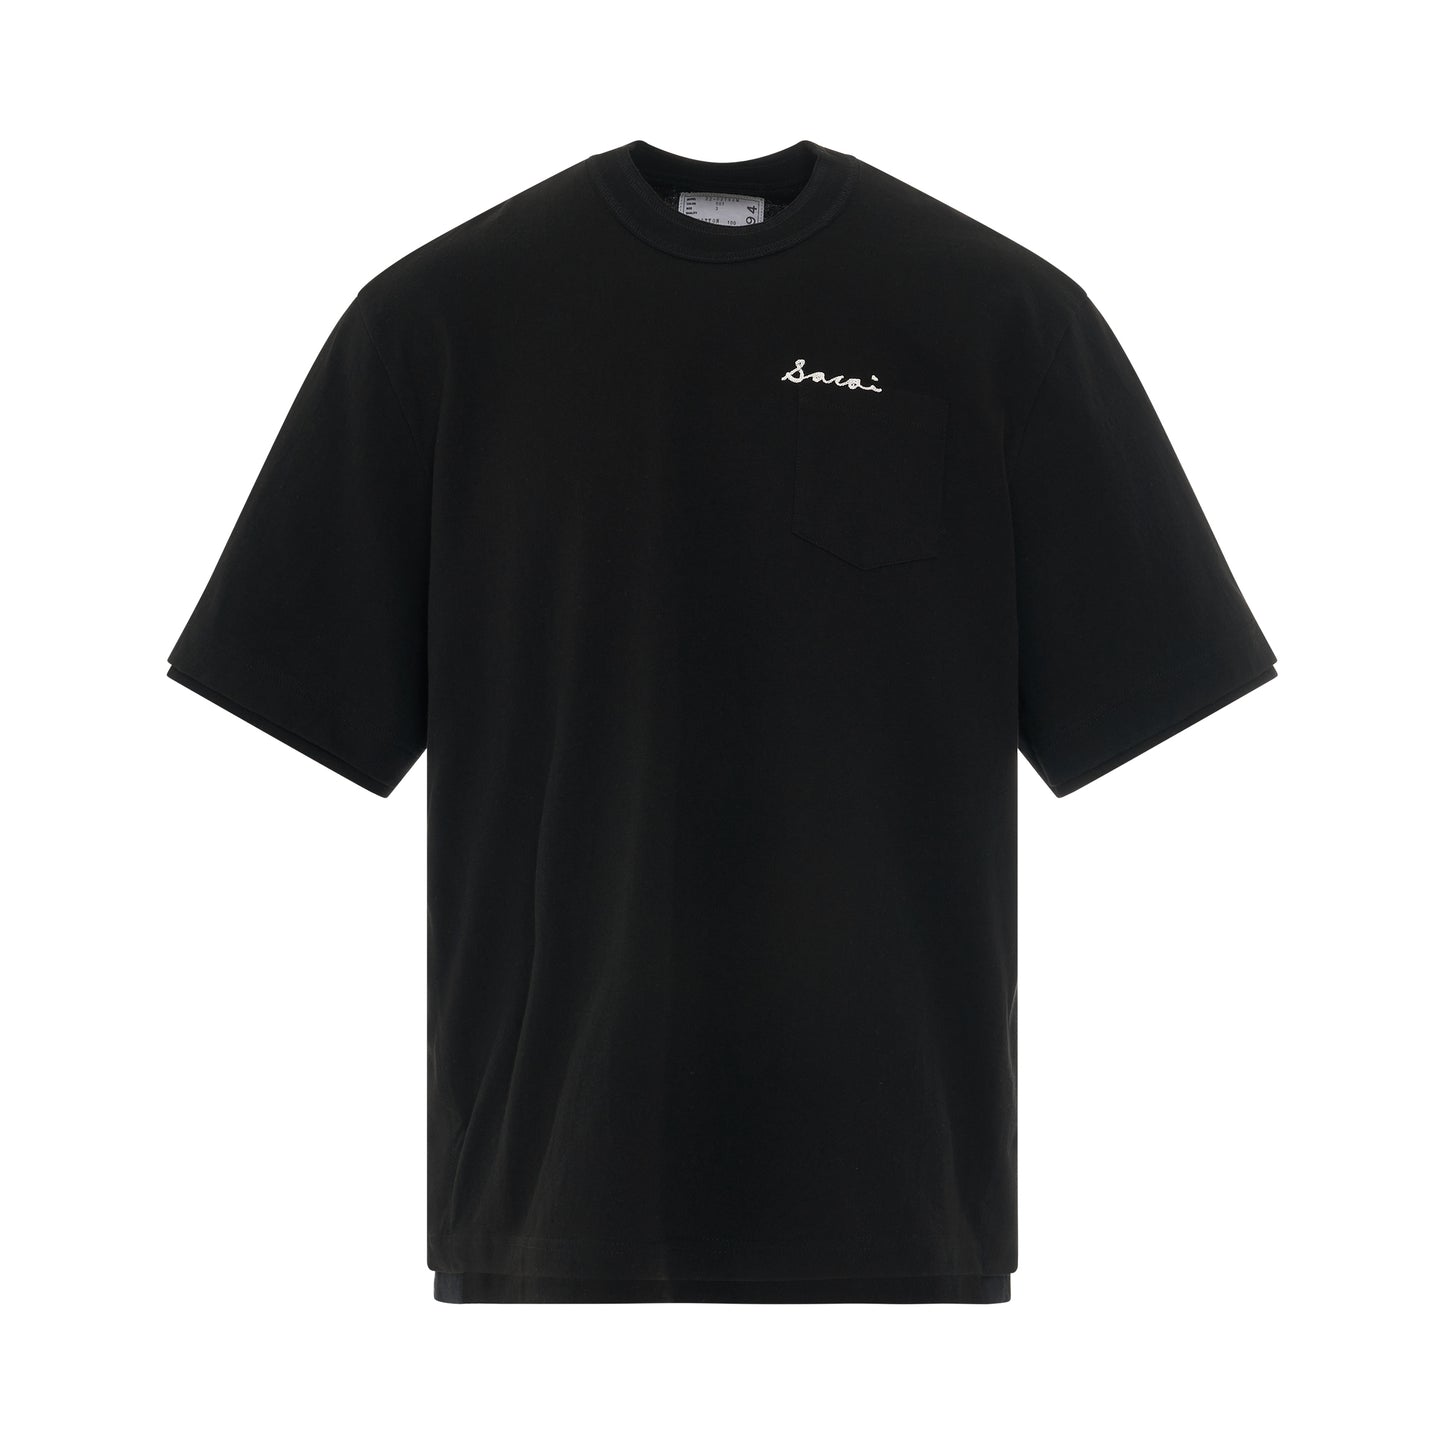 Cotton Twill T-Shirt with Pocket in Black